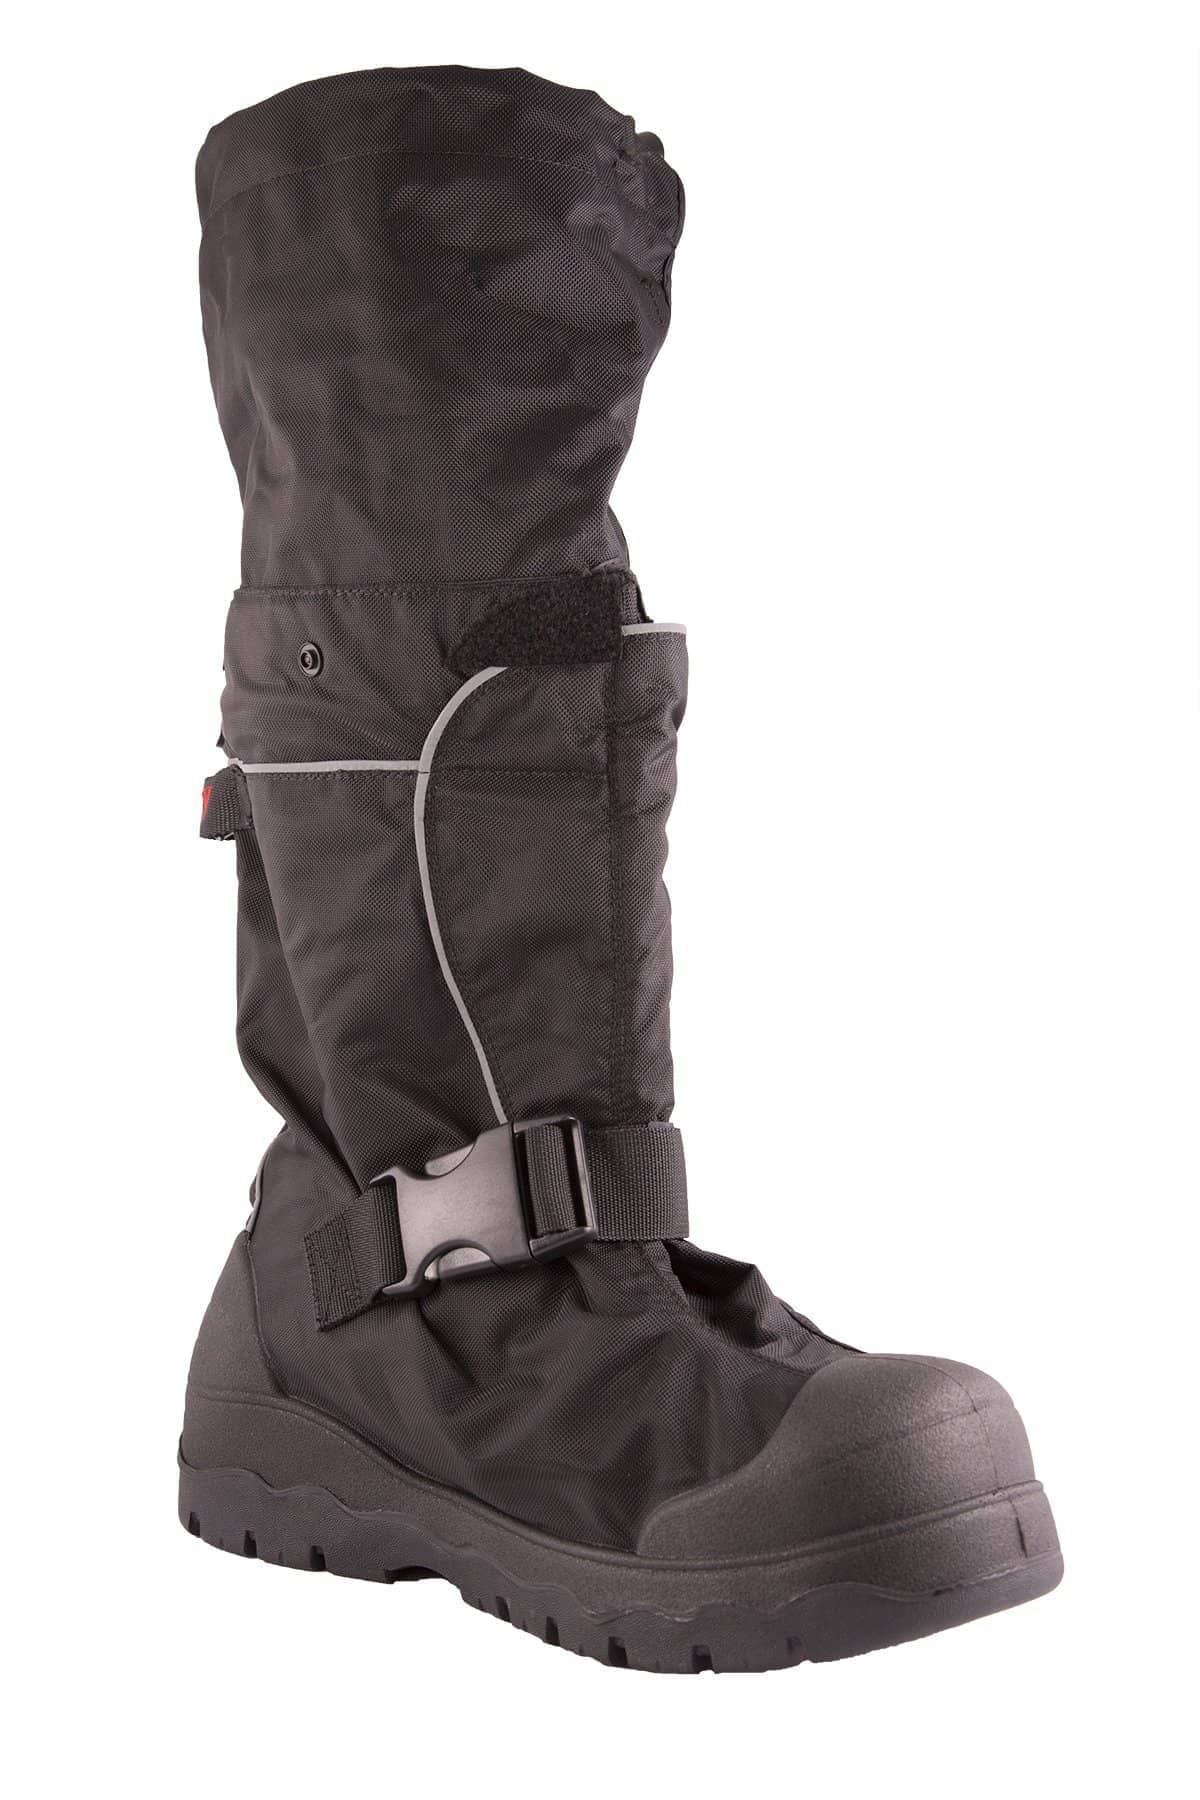 TINGLEY - Orian Winter Overshoe with Gaiter - Becker Safety and Supply